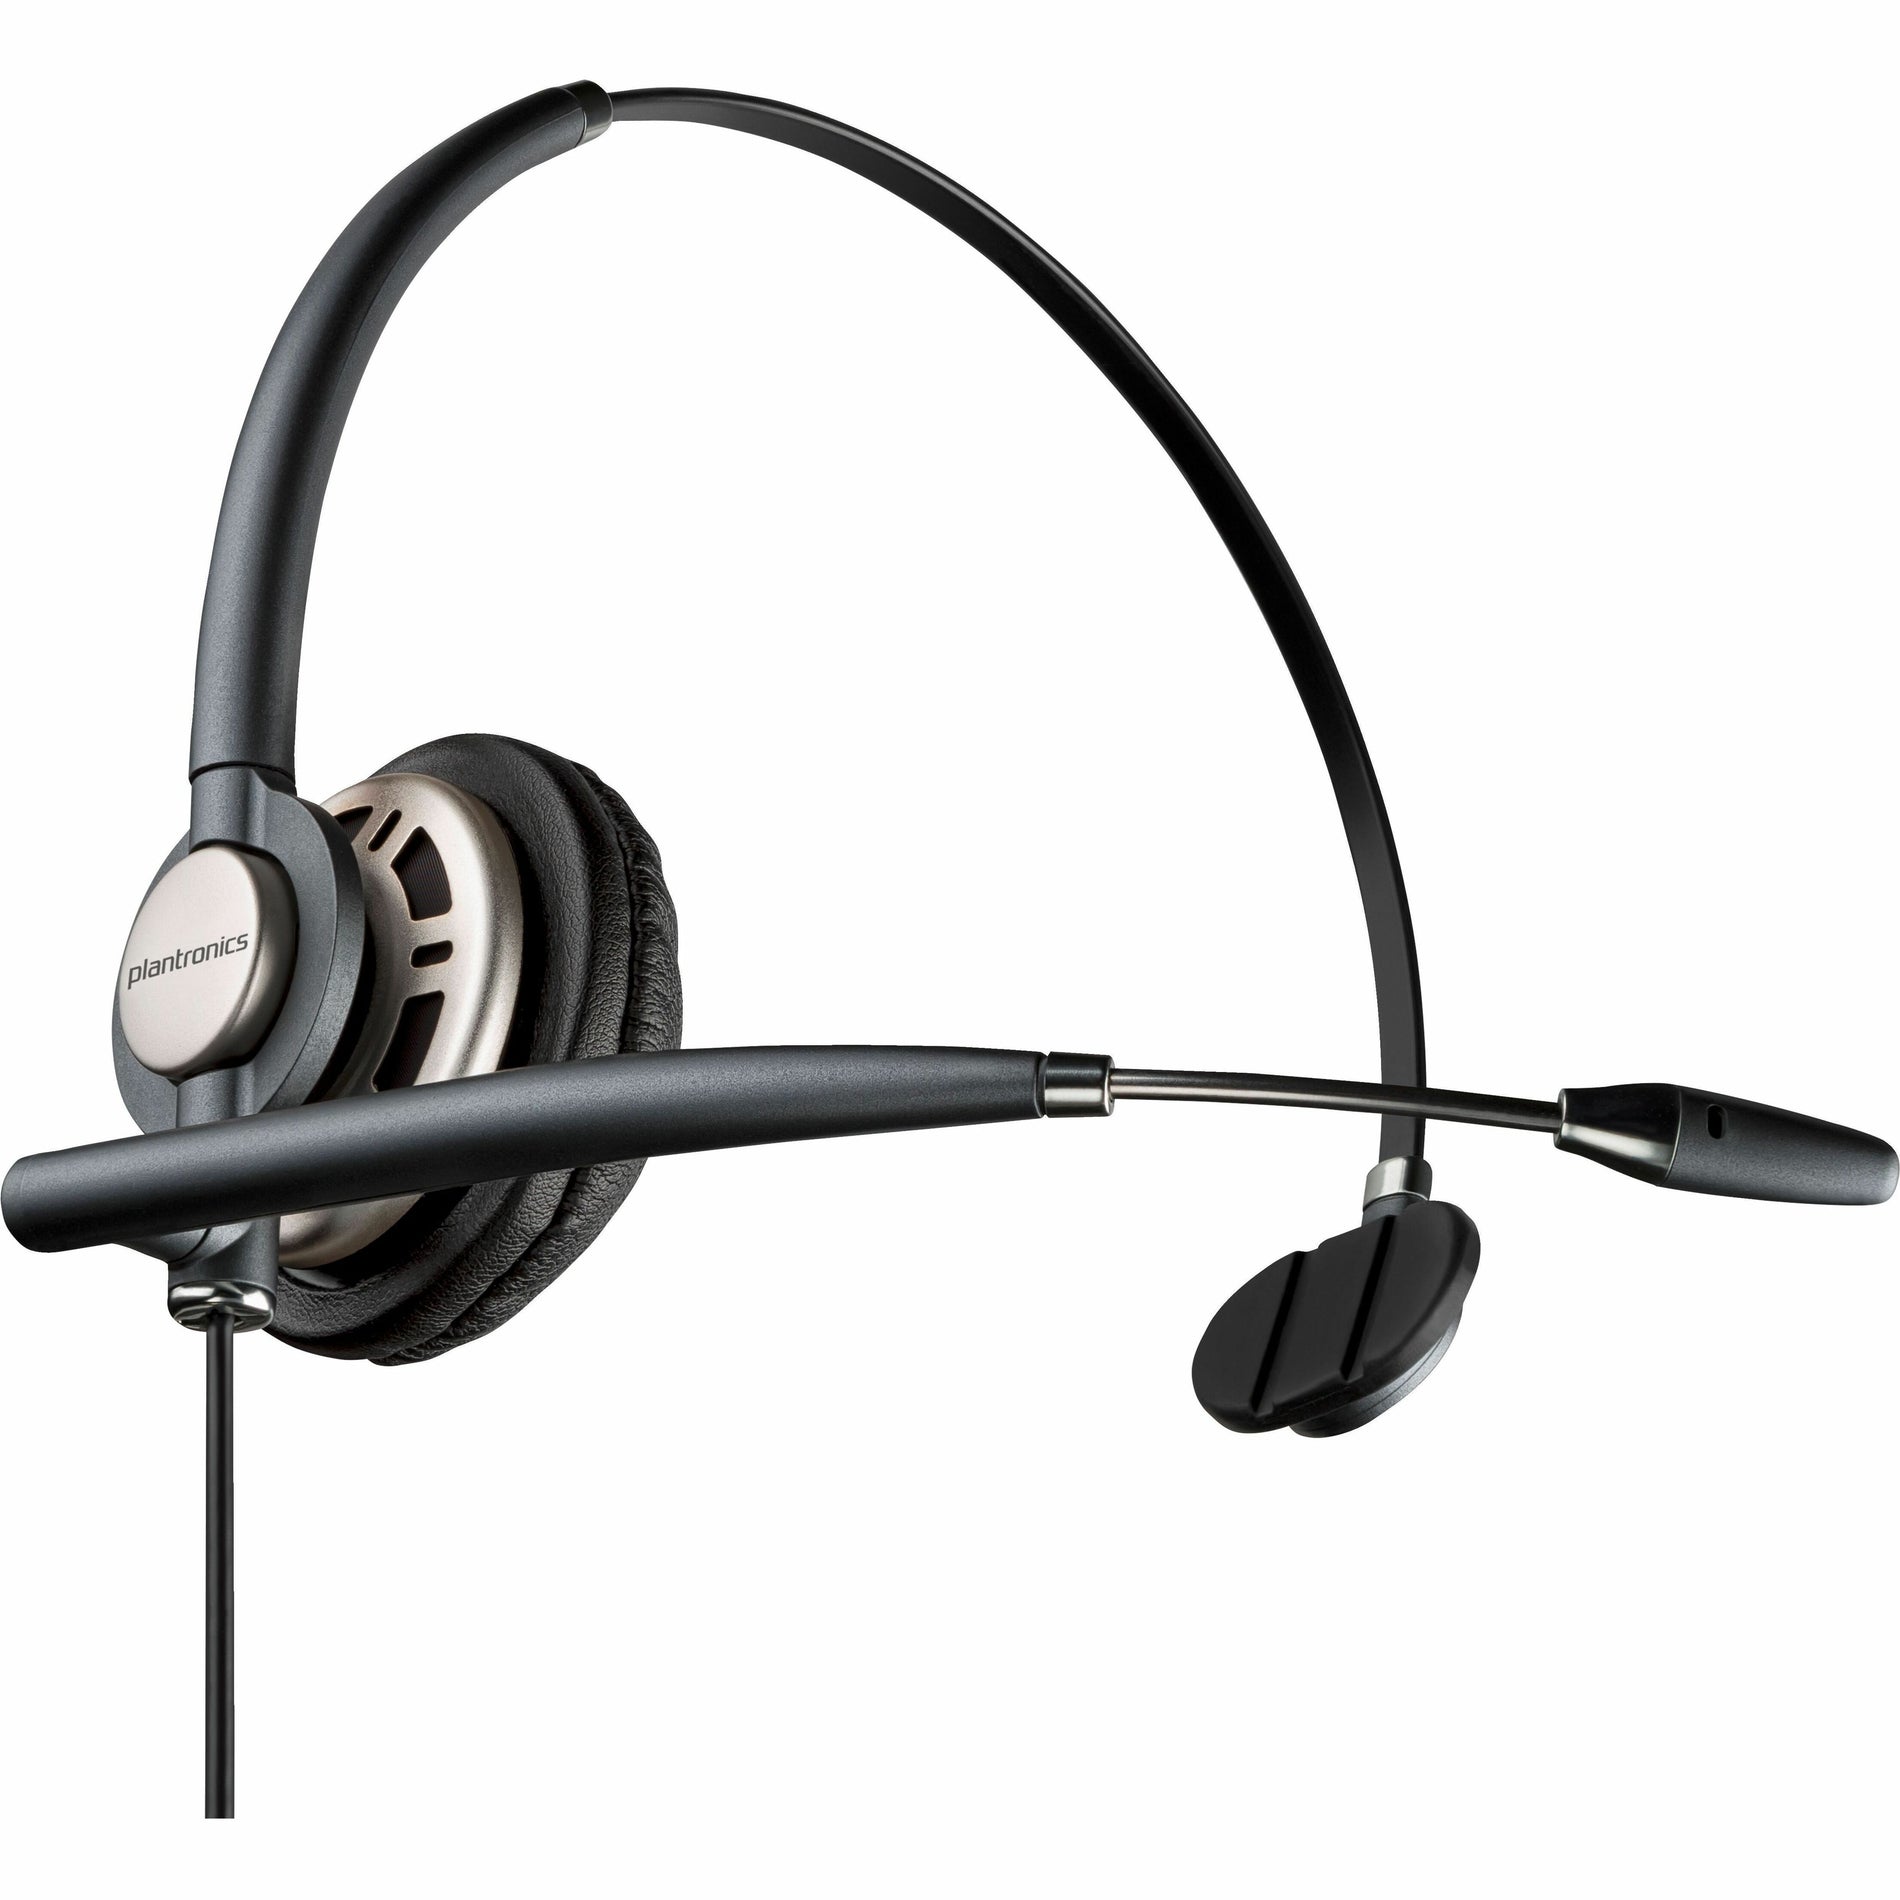 Poly EncorePro HW710 Headset, USB Wired Monaural Over-the-head Headset for Business, Call Center, Voice Call, Desk Phone